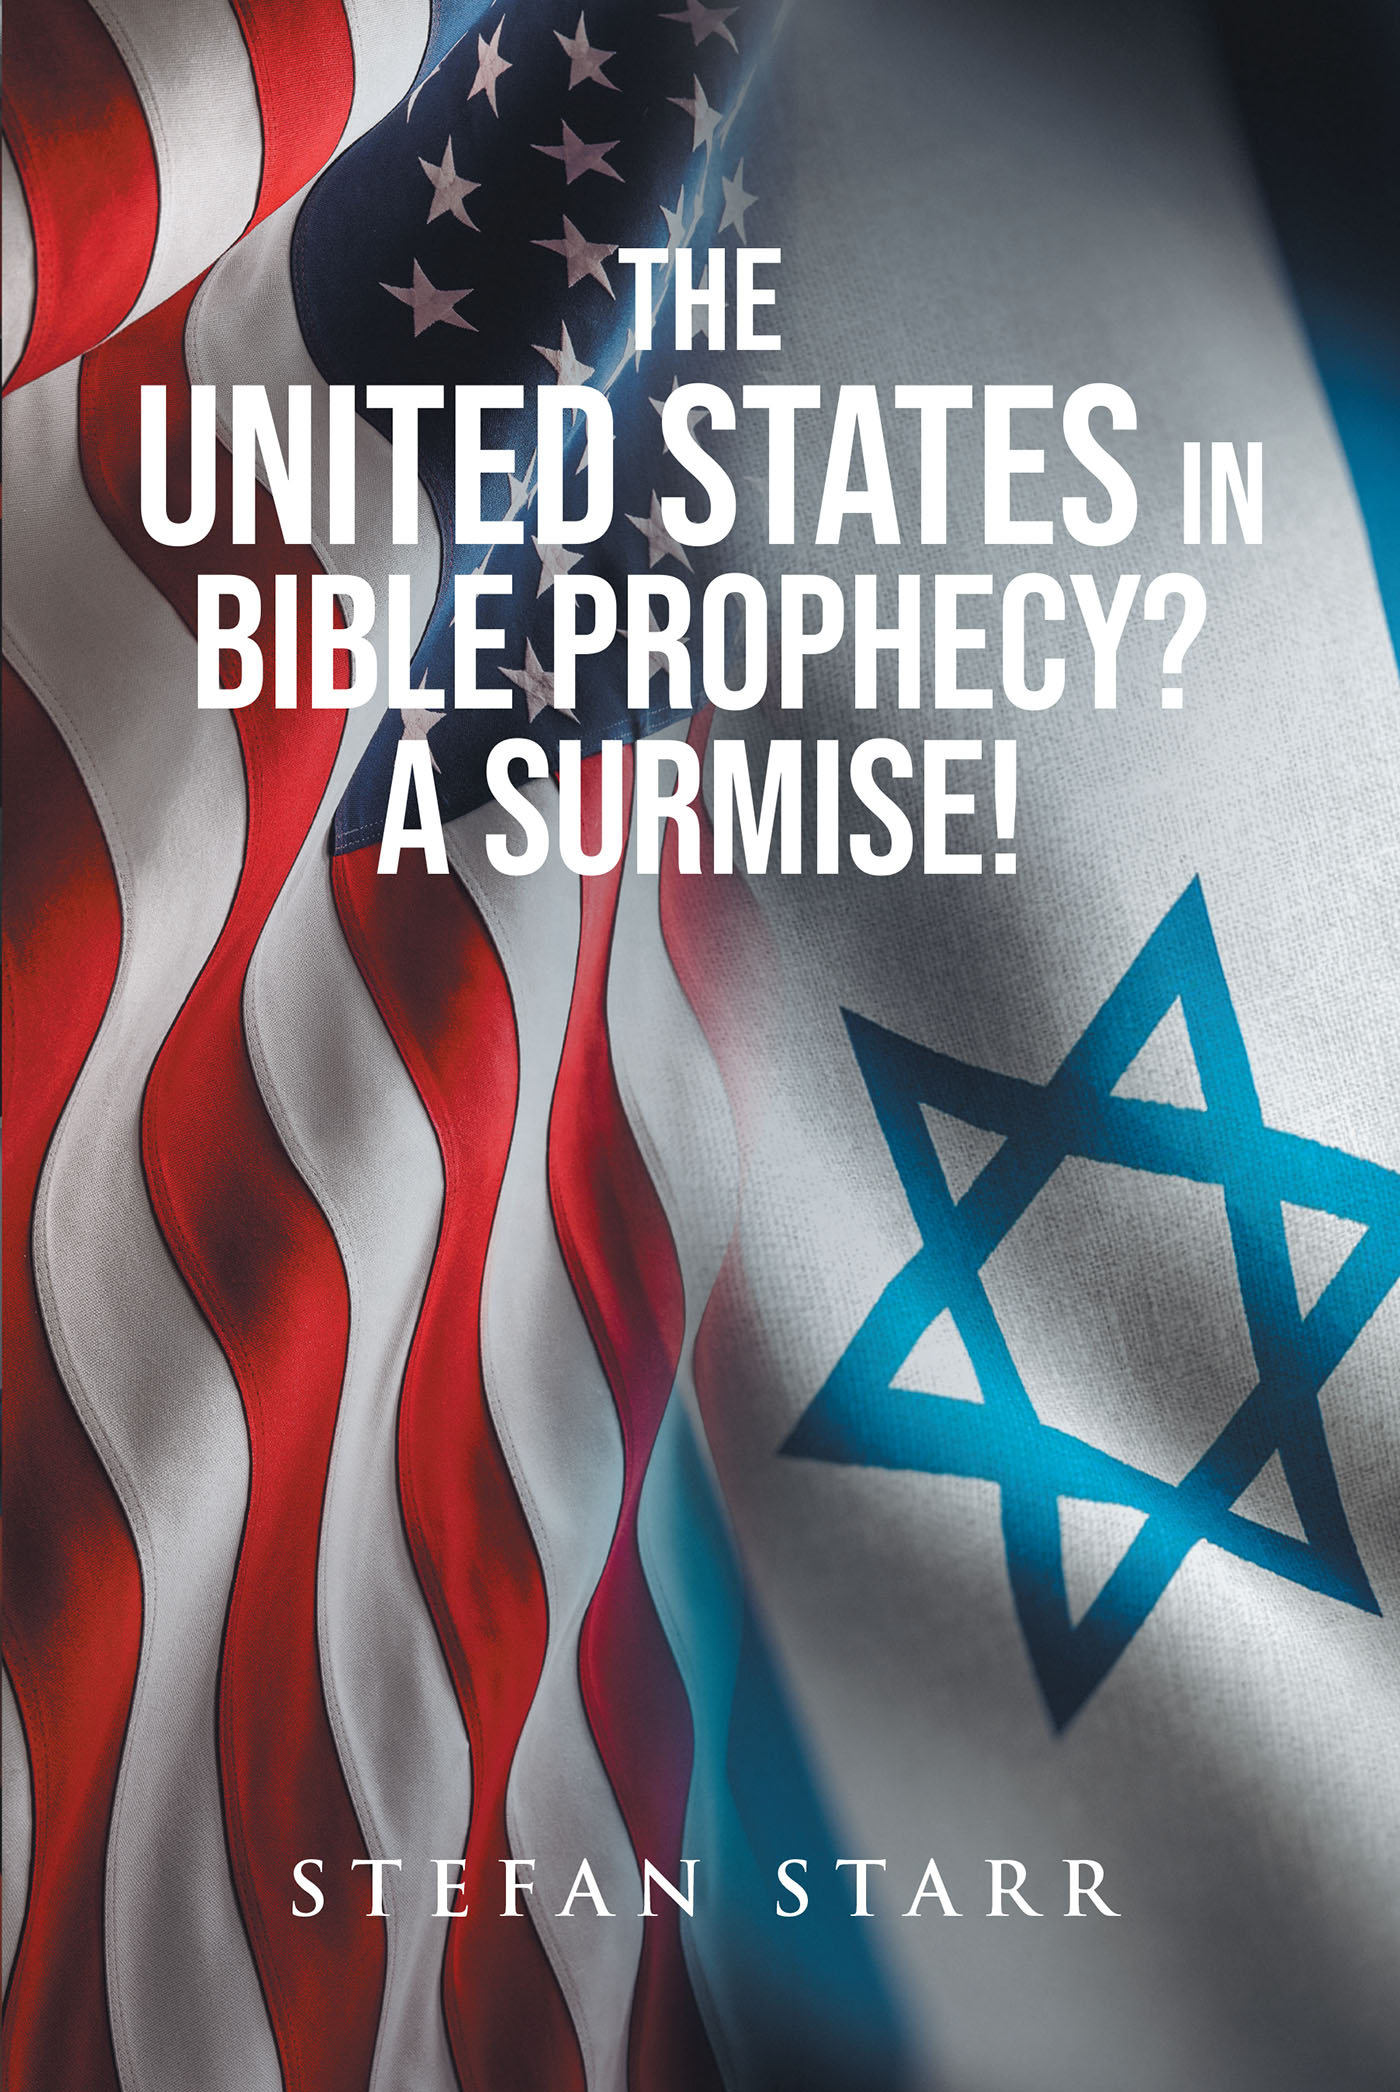 Stefan Starr’s Newly Released “The United States In Bible Prophecy? A Surmise!” is a Thought-Provoking Exploration of What Potentially Awaits